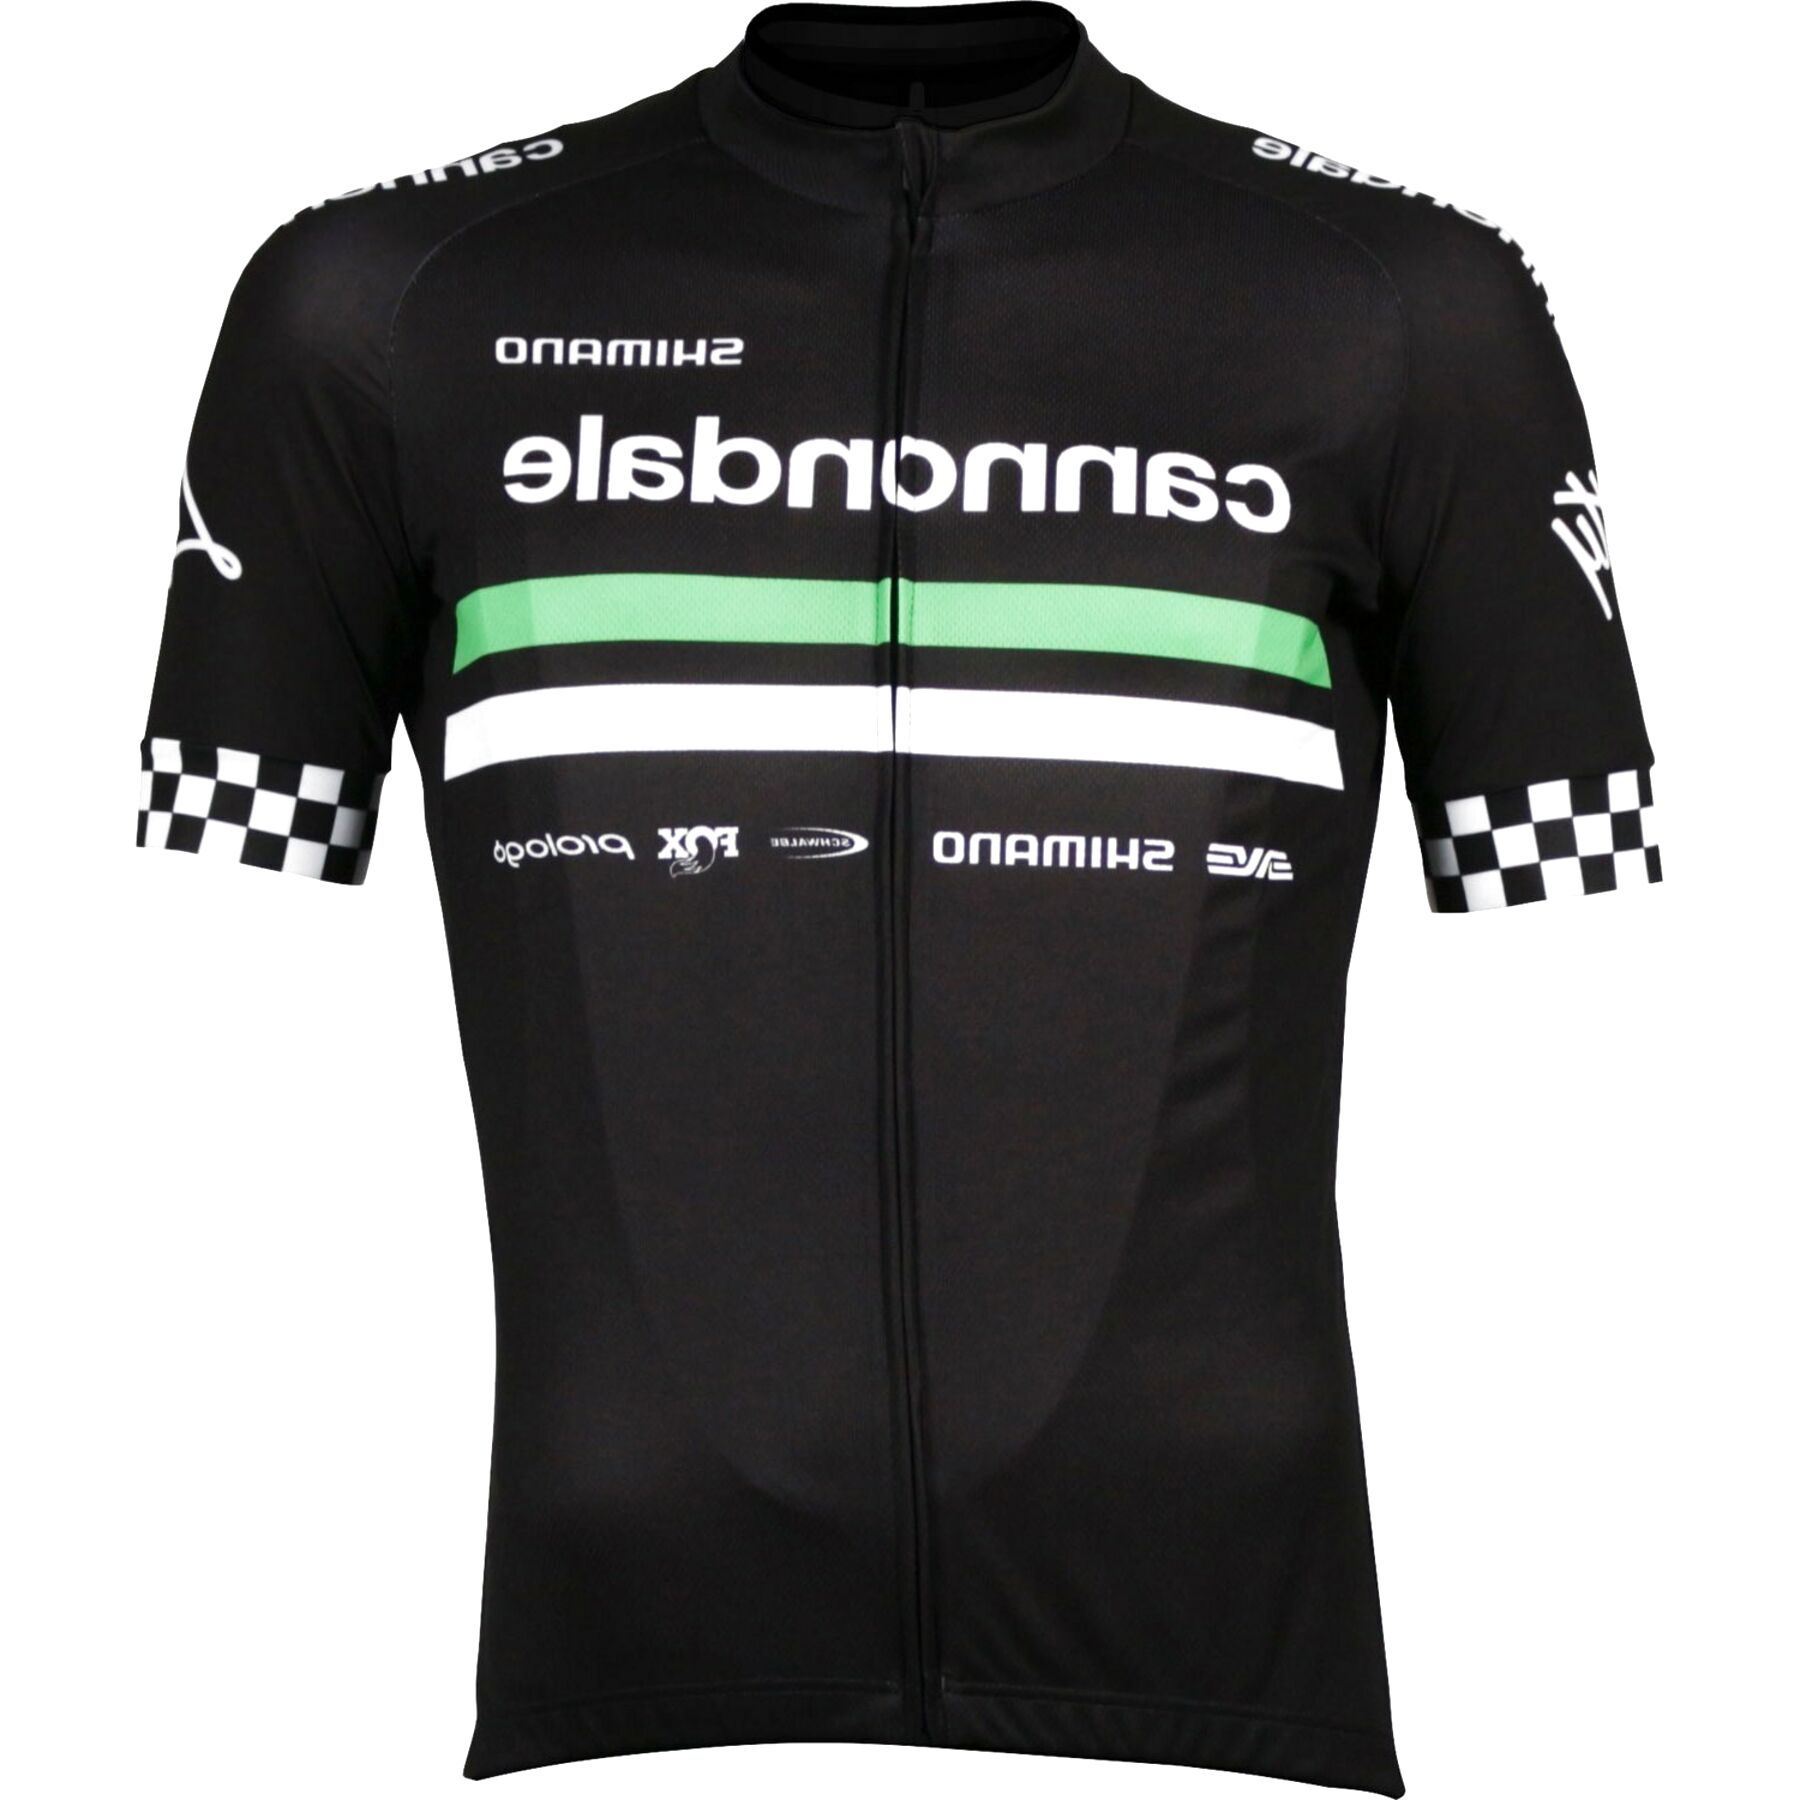 Cannondale Team Jersey for sale in UK | 47 used Cannondale Team Jerseys